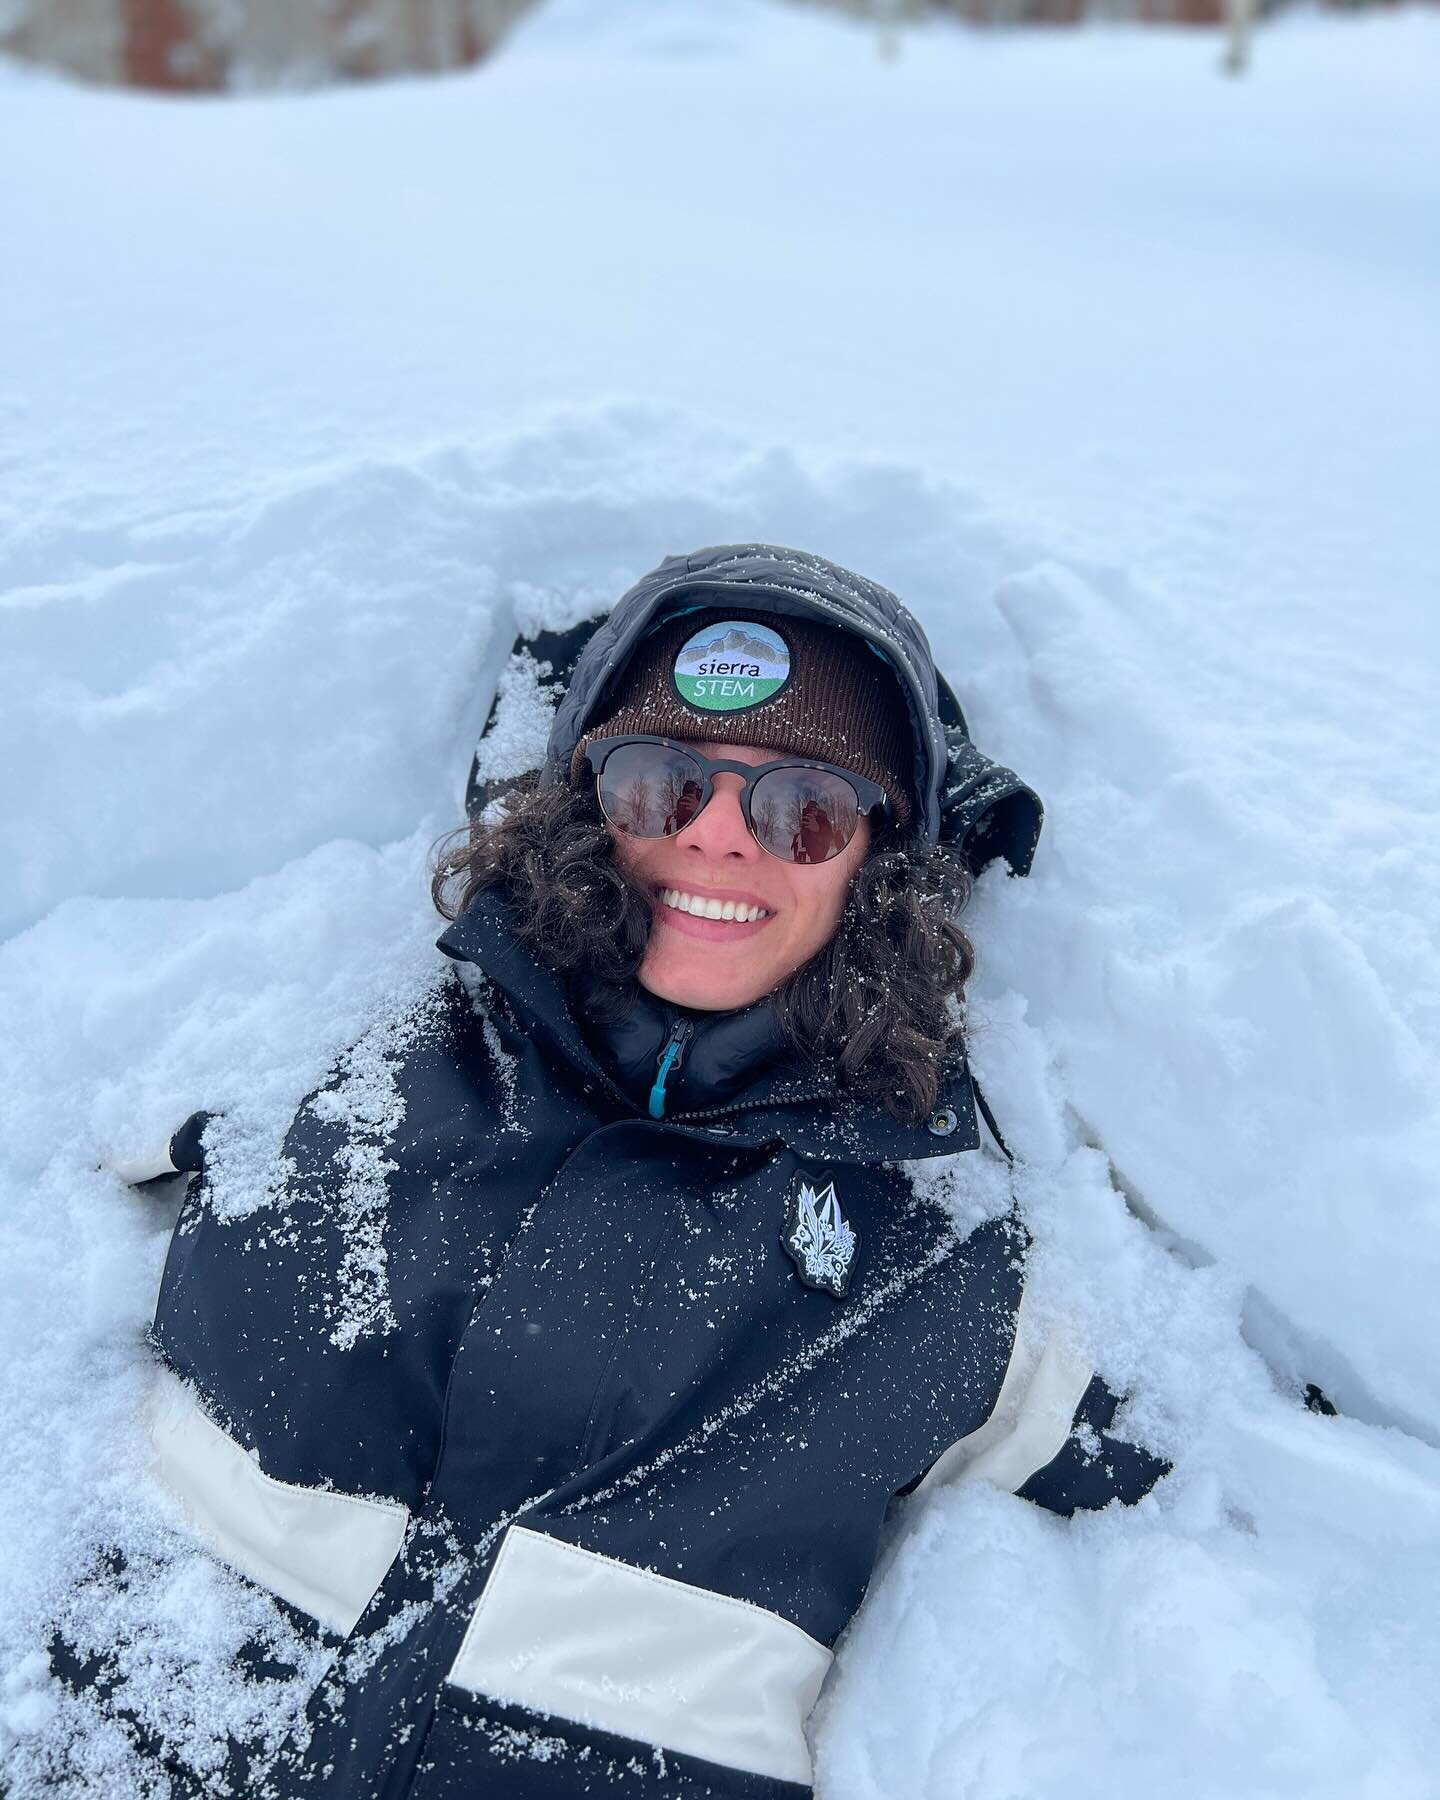 Curious about what&rsquo;s new at Sierra STEM in 2024? Sneak peek below&hellip;

NEW WINTER CURRICULUM: We&rsquo;re developing a brand new, snow science curriculum that we can&rsquo;t wait to take into the field. Get excited to snowshoe, dig pits, an